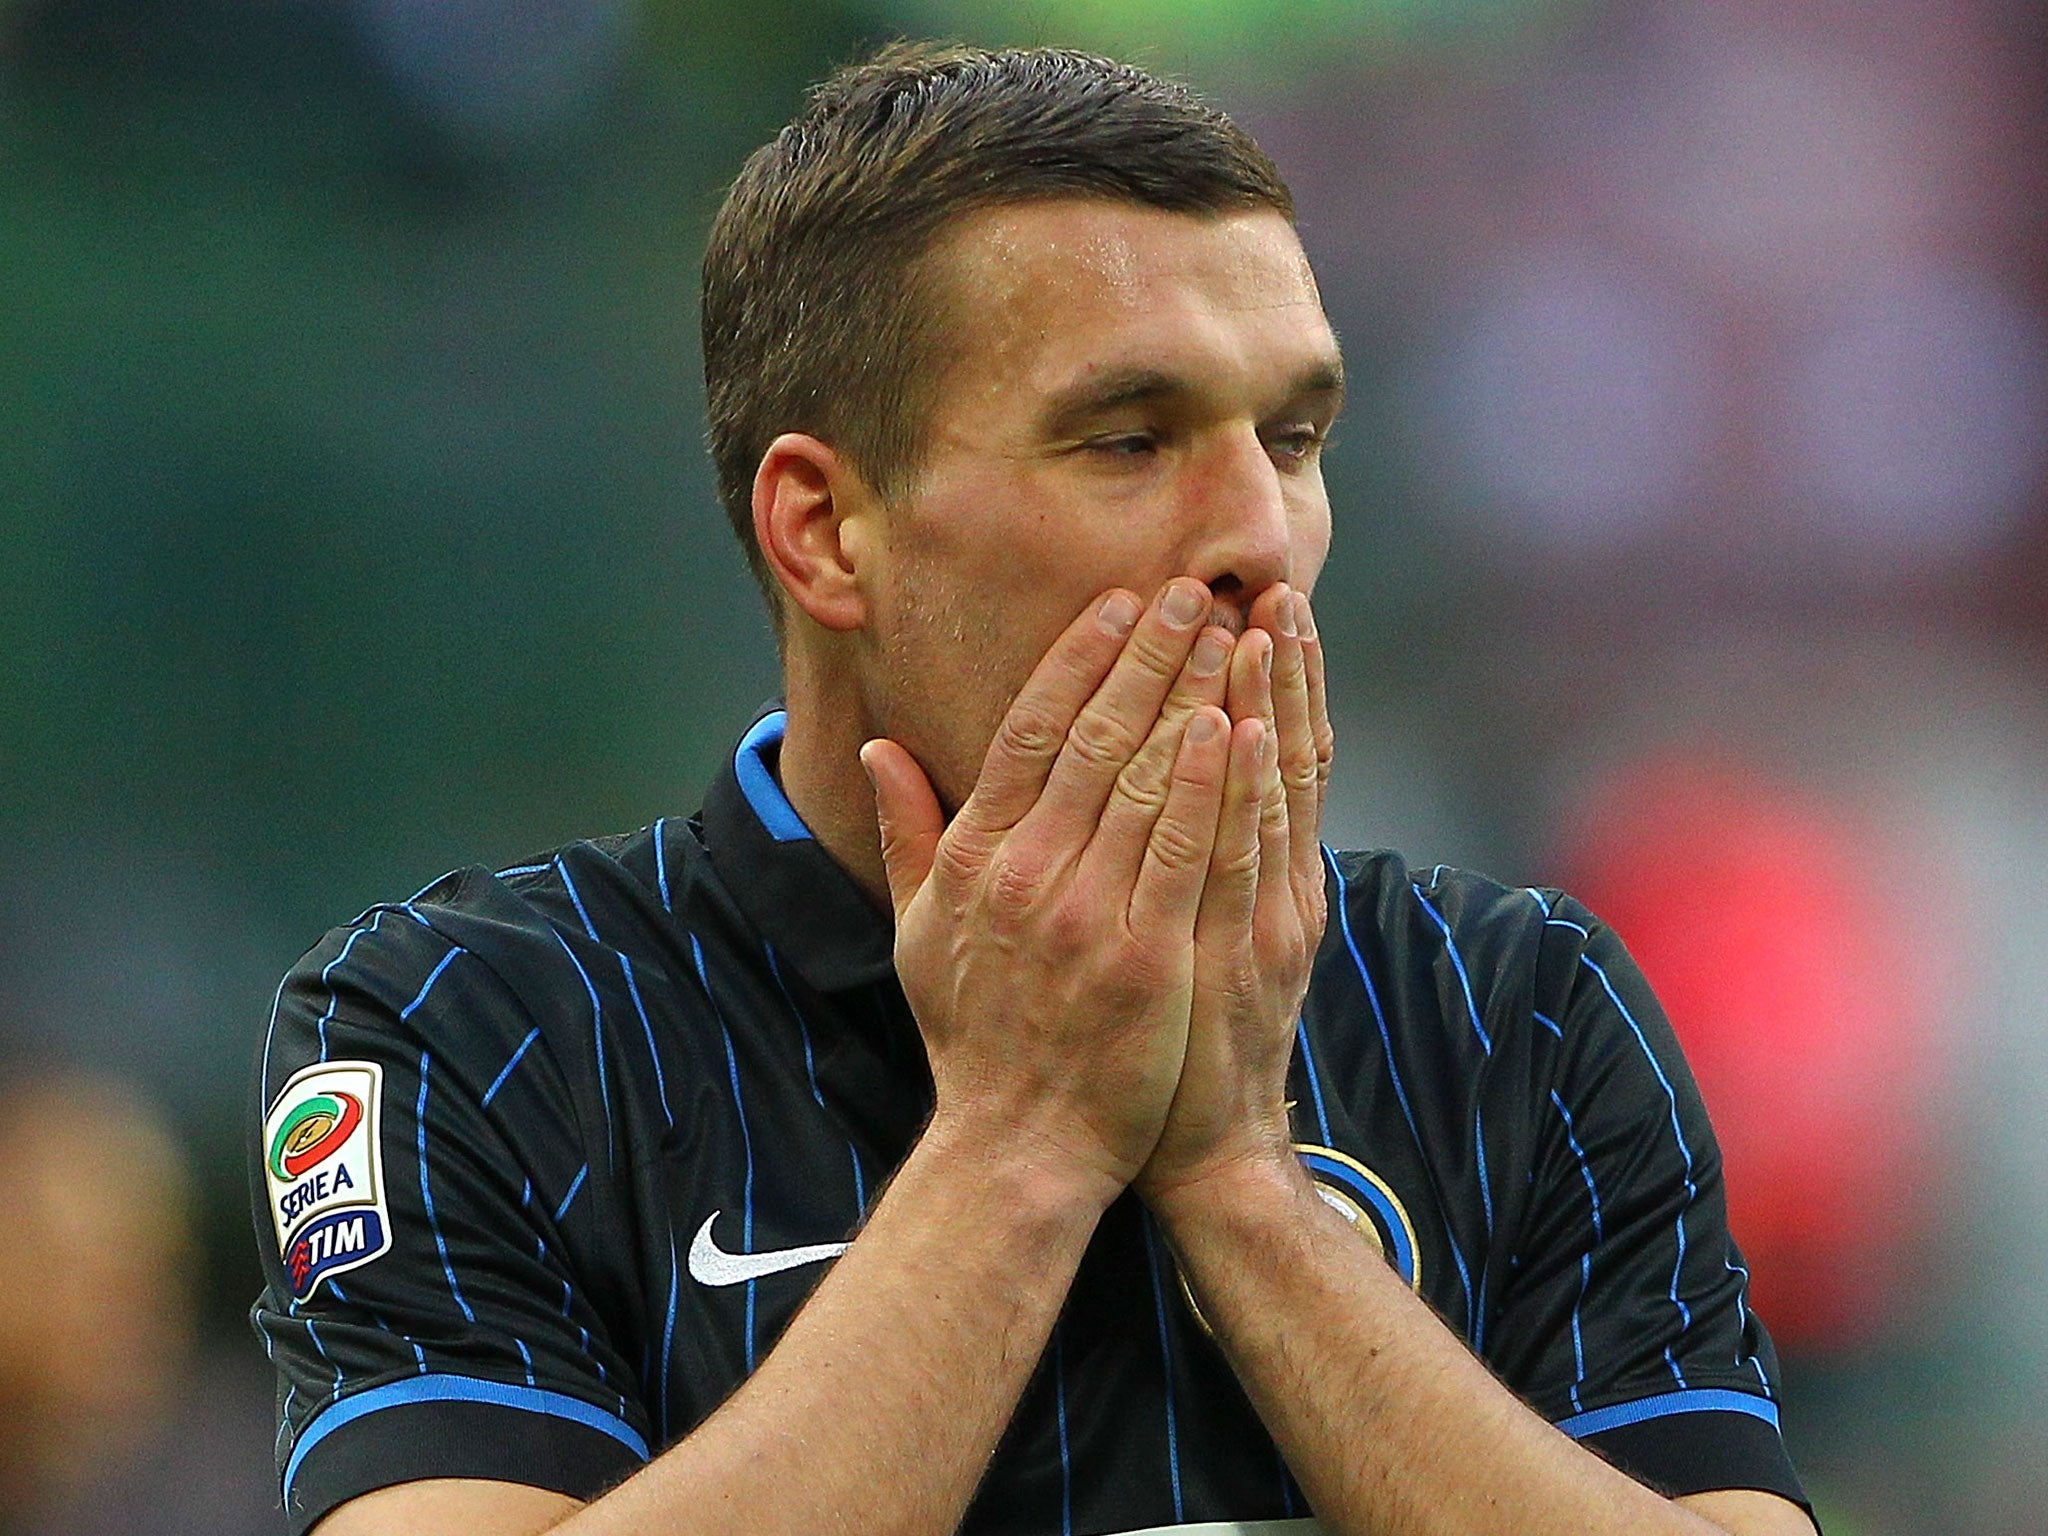 Lukas Podolski has not been playing well for Inter Milan